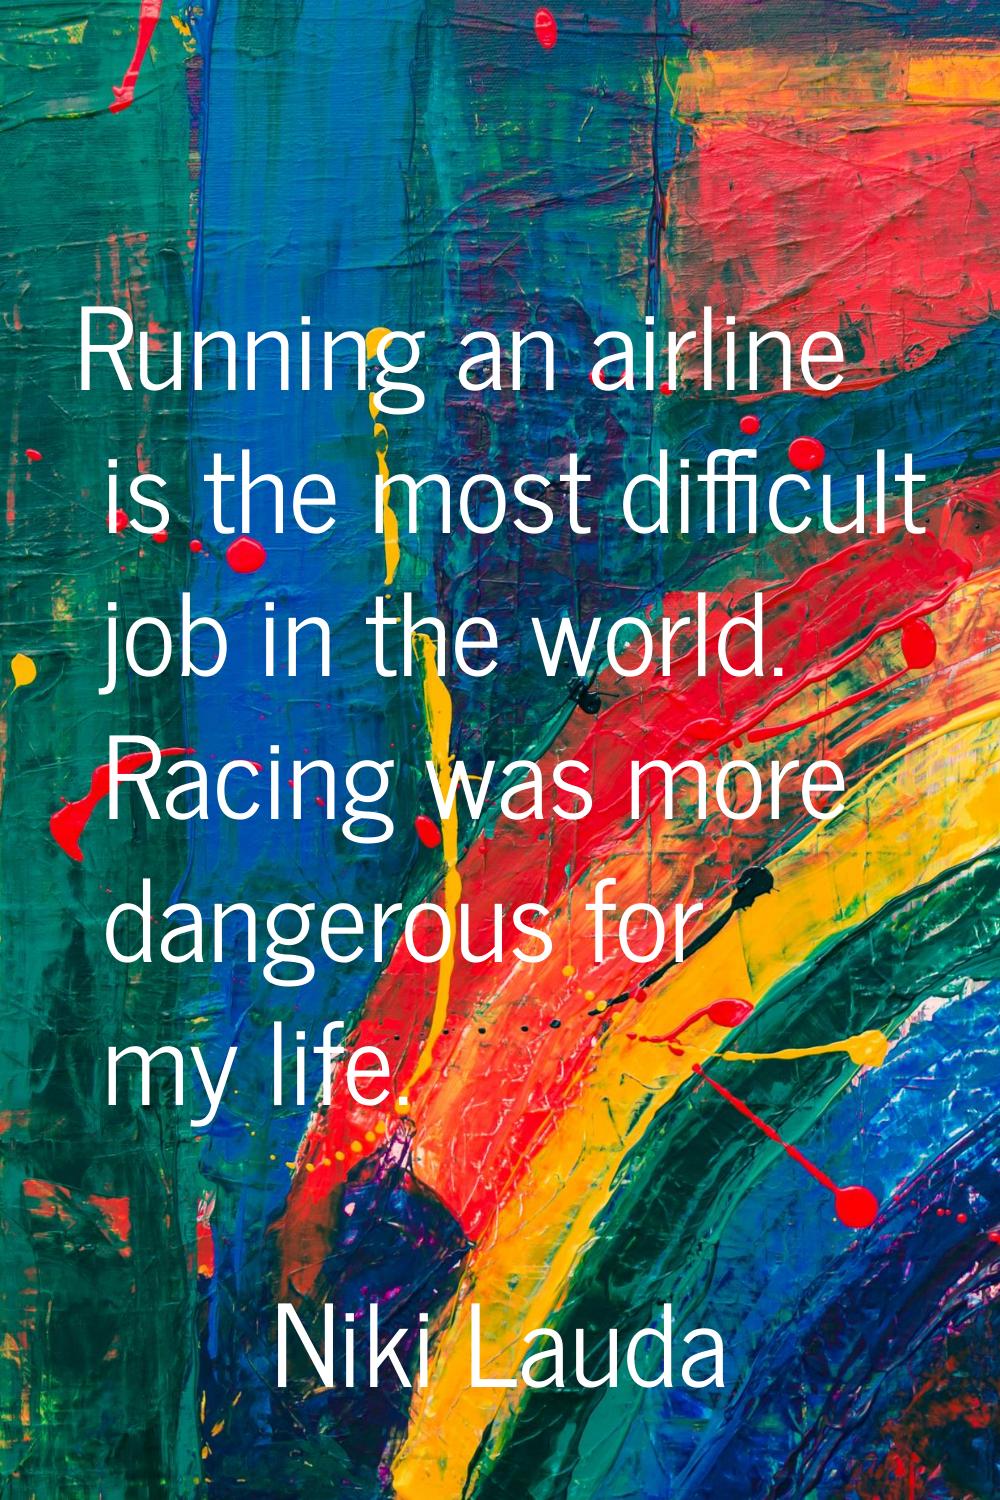 Running an airline is the most difficult job in the world. Racing was more dangerous for my life.